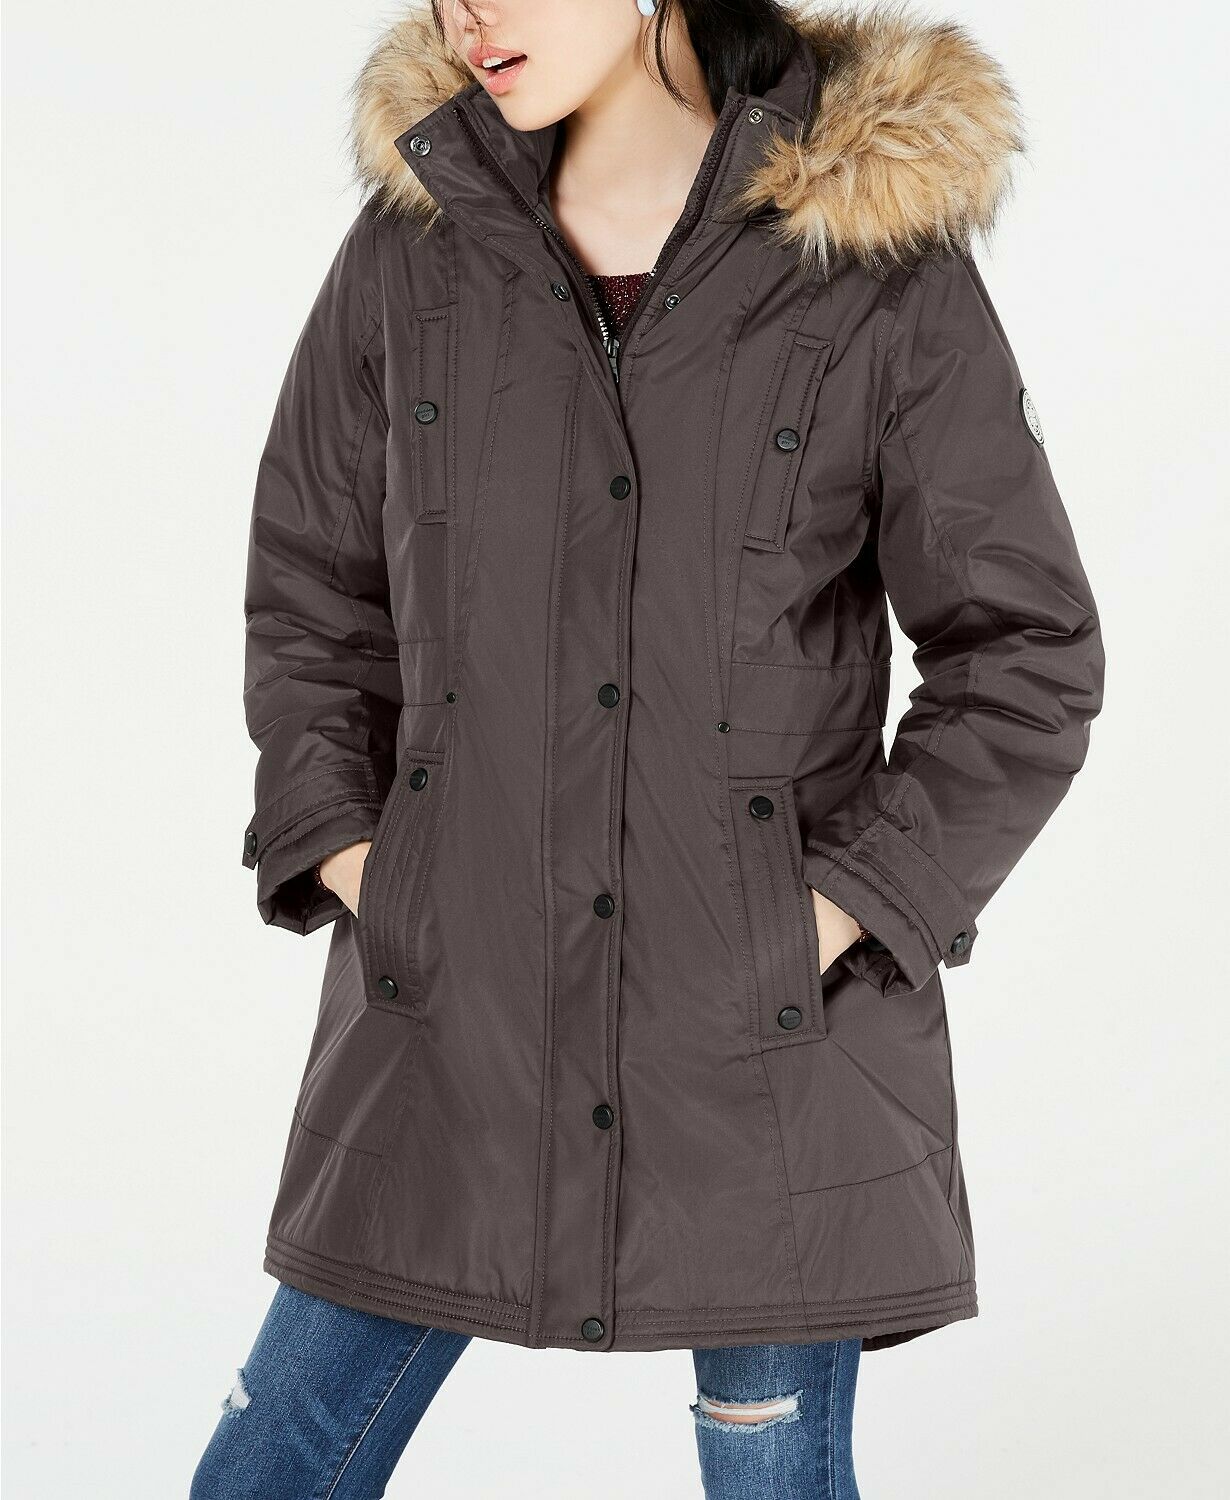 Madden Girl Juniors Women's Faux Fur Trim Hooded Parka Jacket, Gray XS - NEW - image 1 of 3